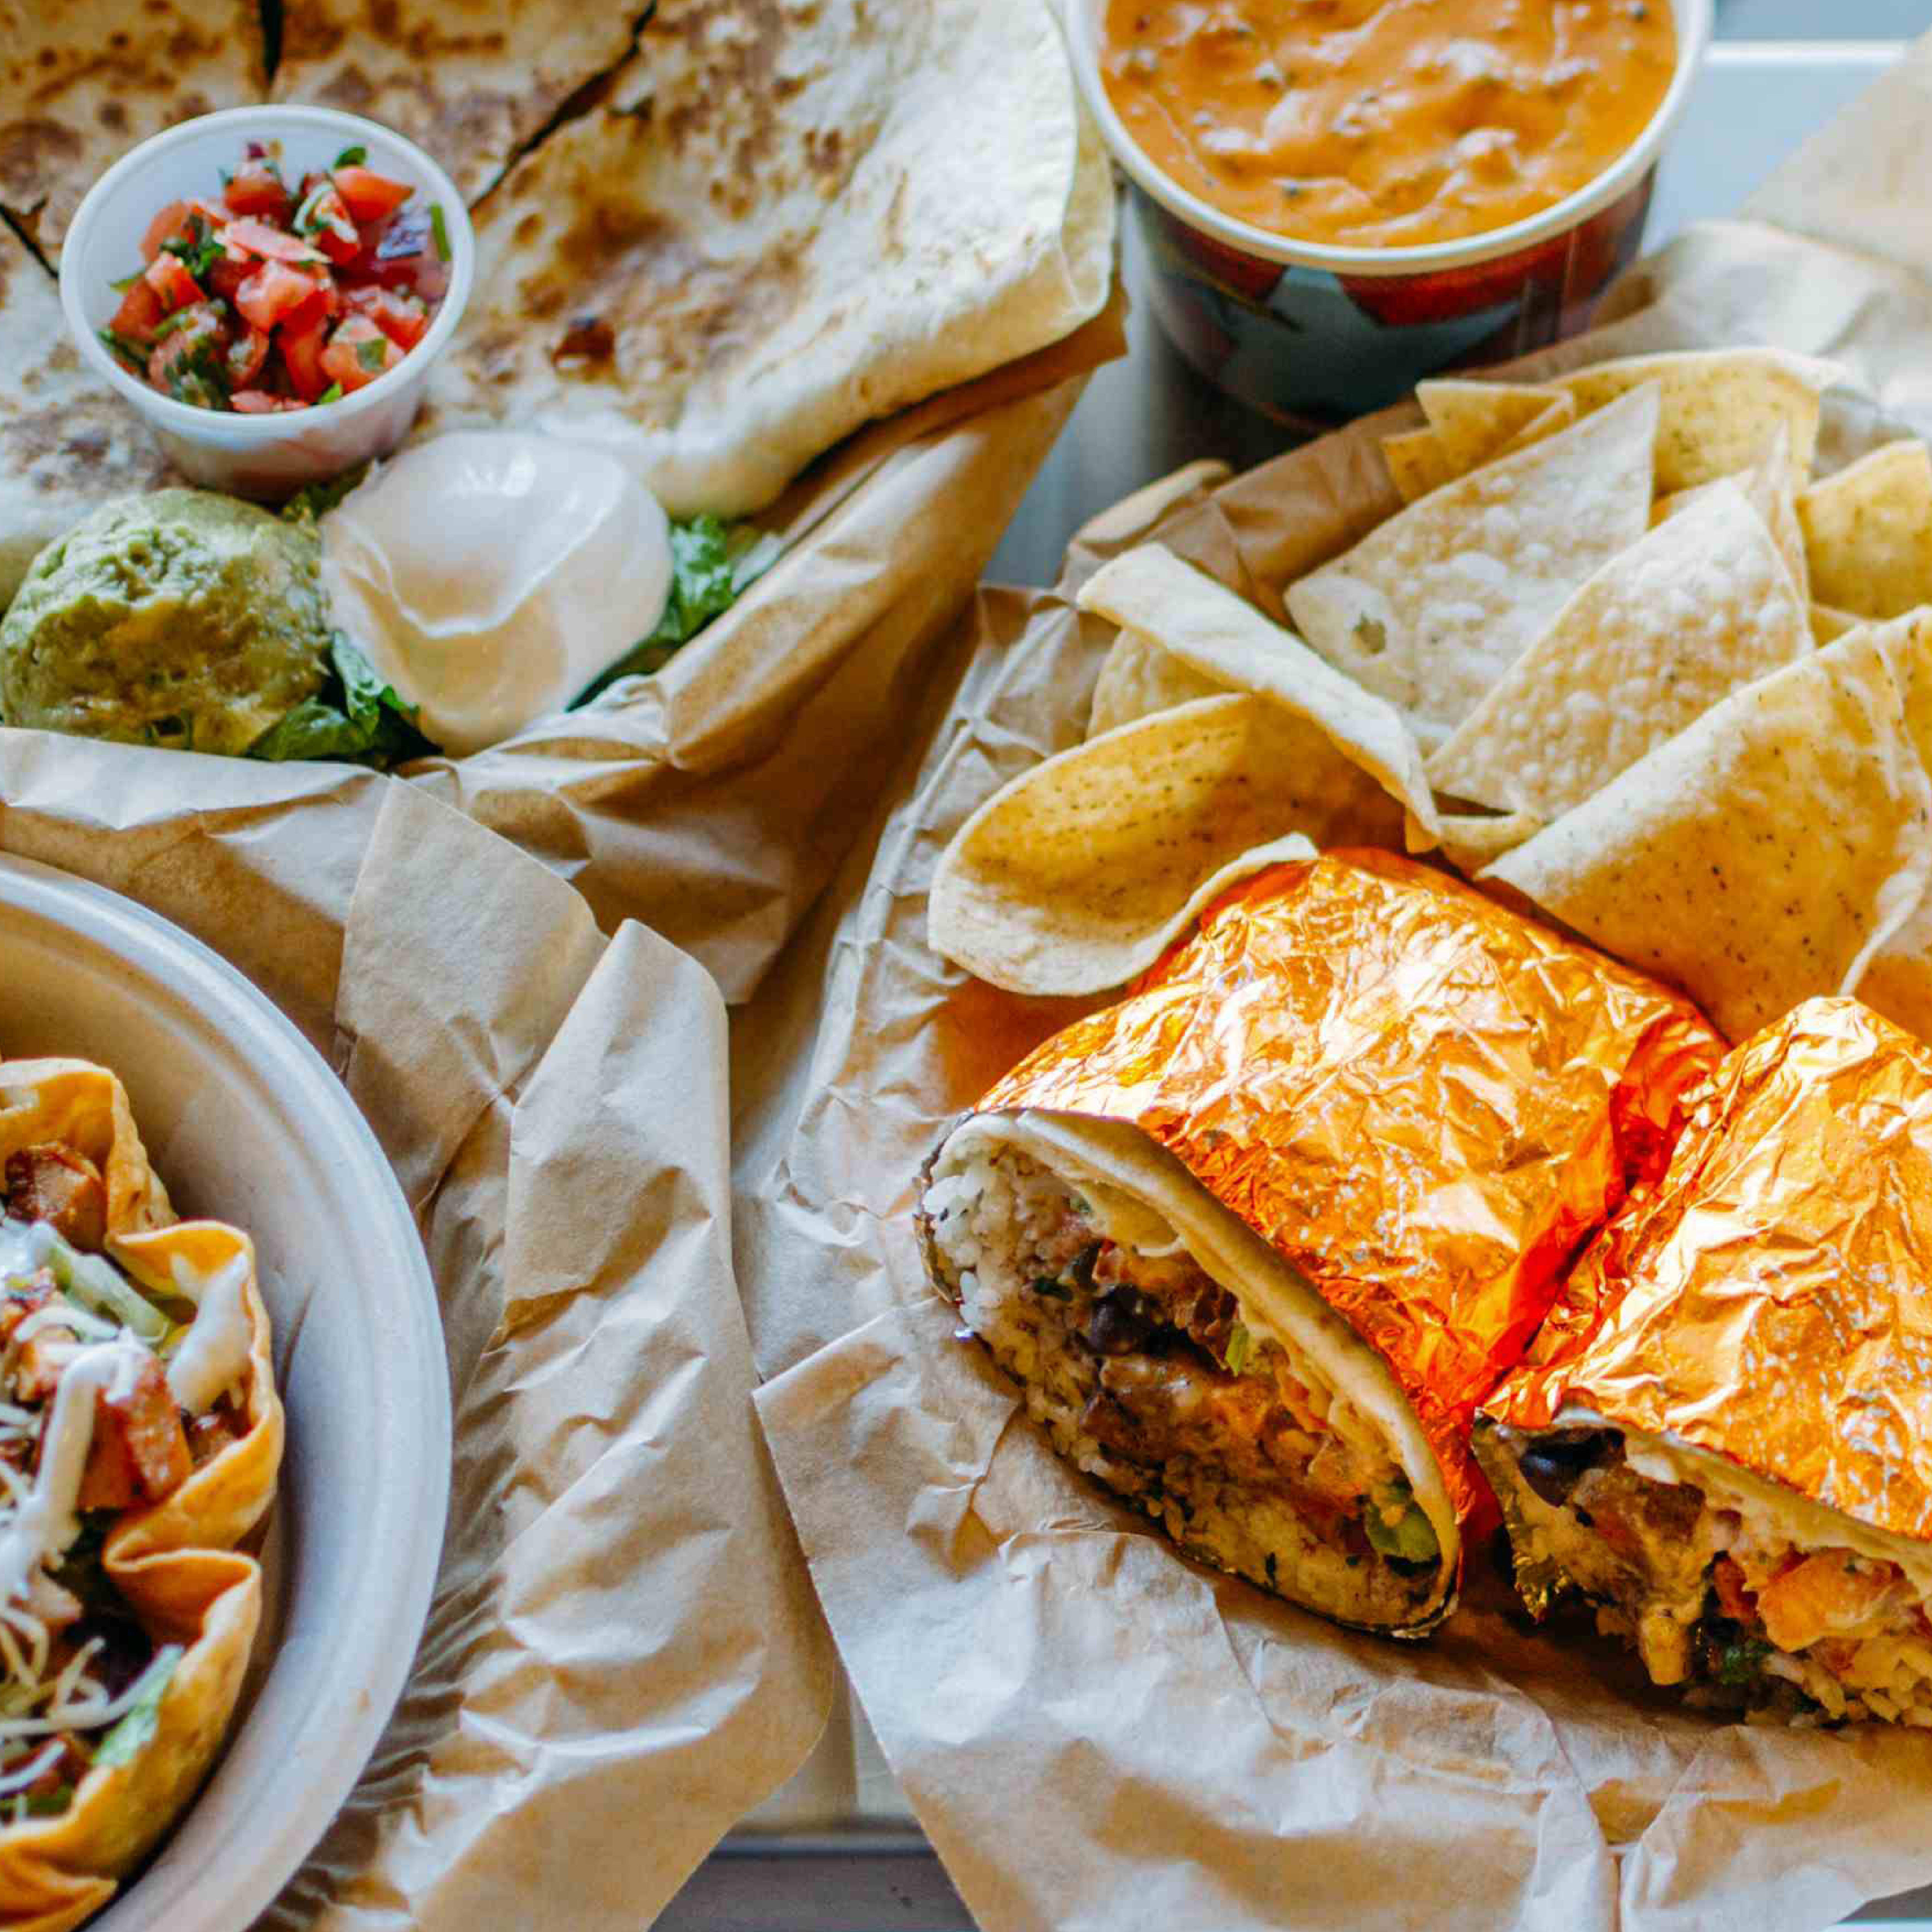 Flavorful burritos, quesadillas and salads are all made with freshly prepared, in-house ingredients like hand-smashed guacamole and pico de gallo.